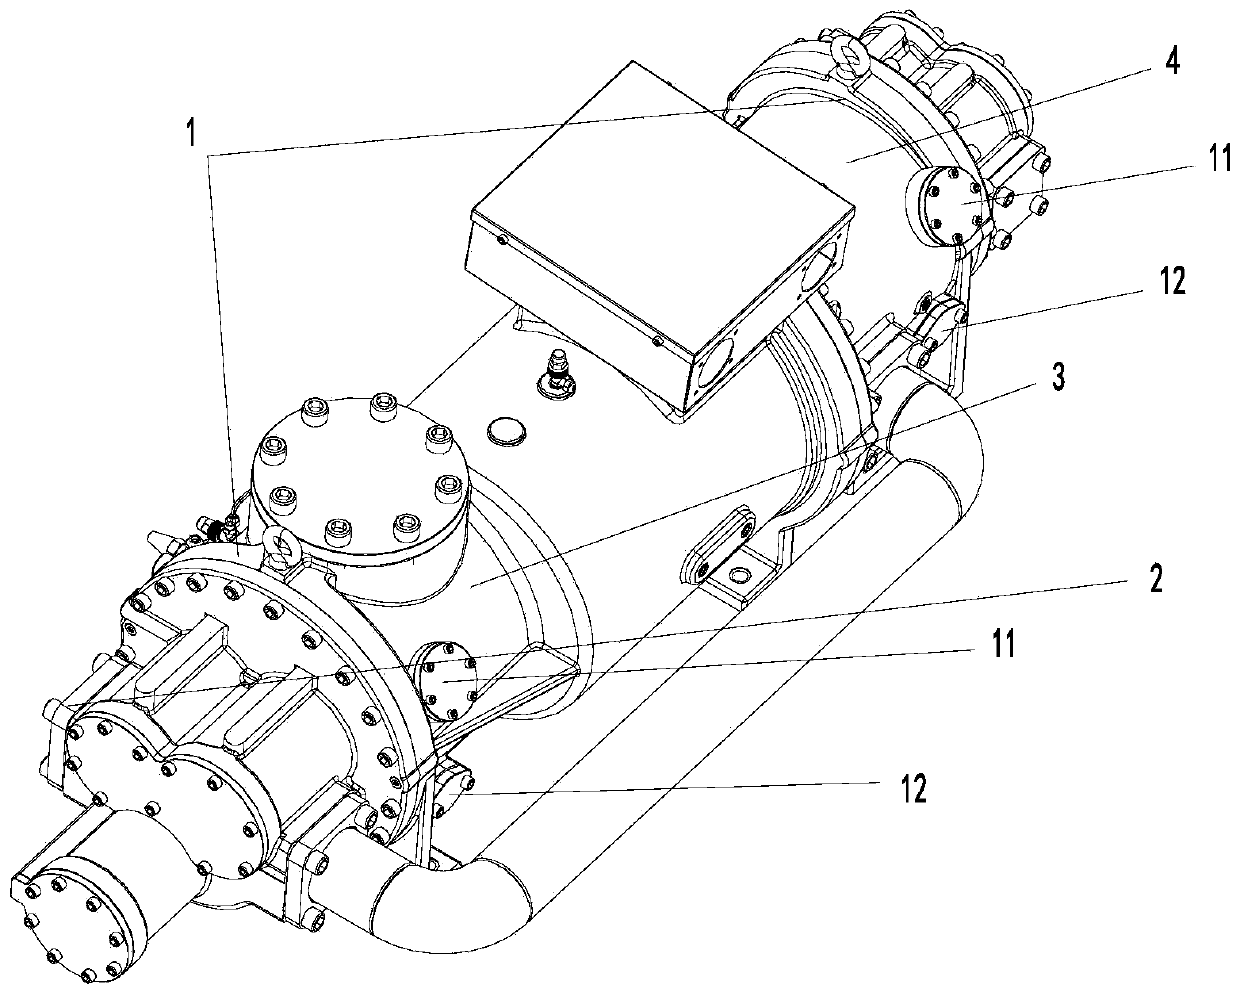 Compressor with multi-air-supplementing structure and air conditioner system